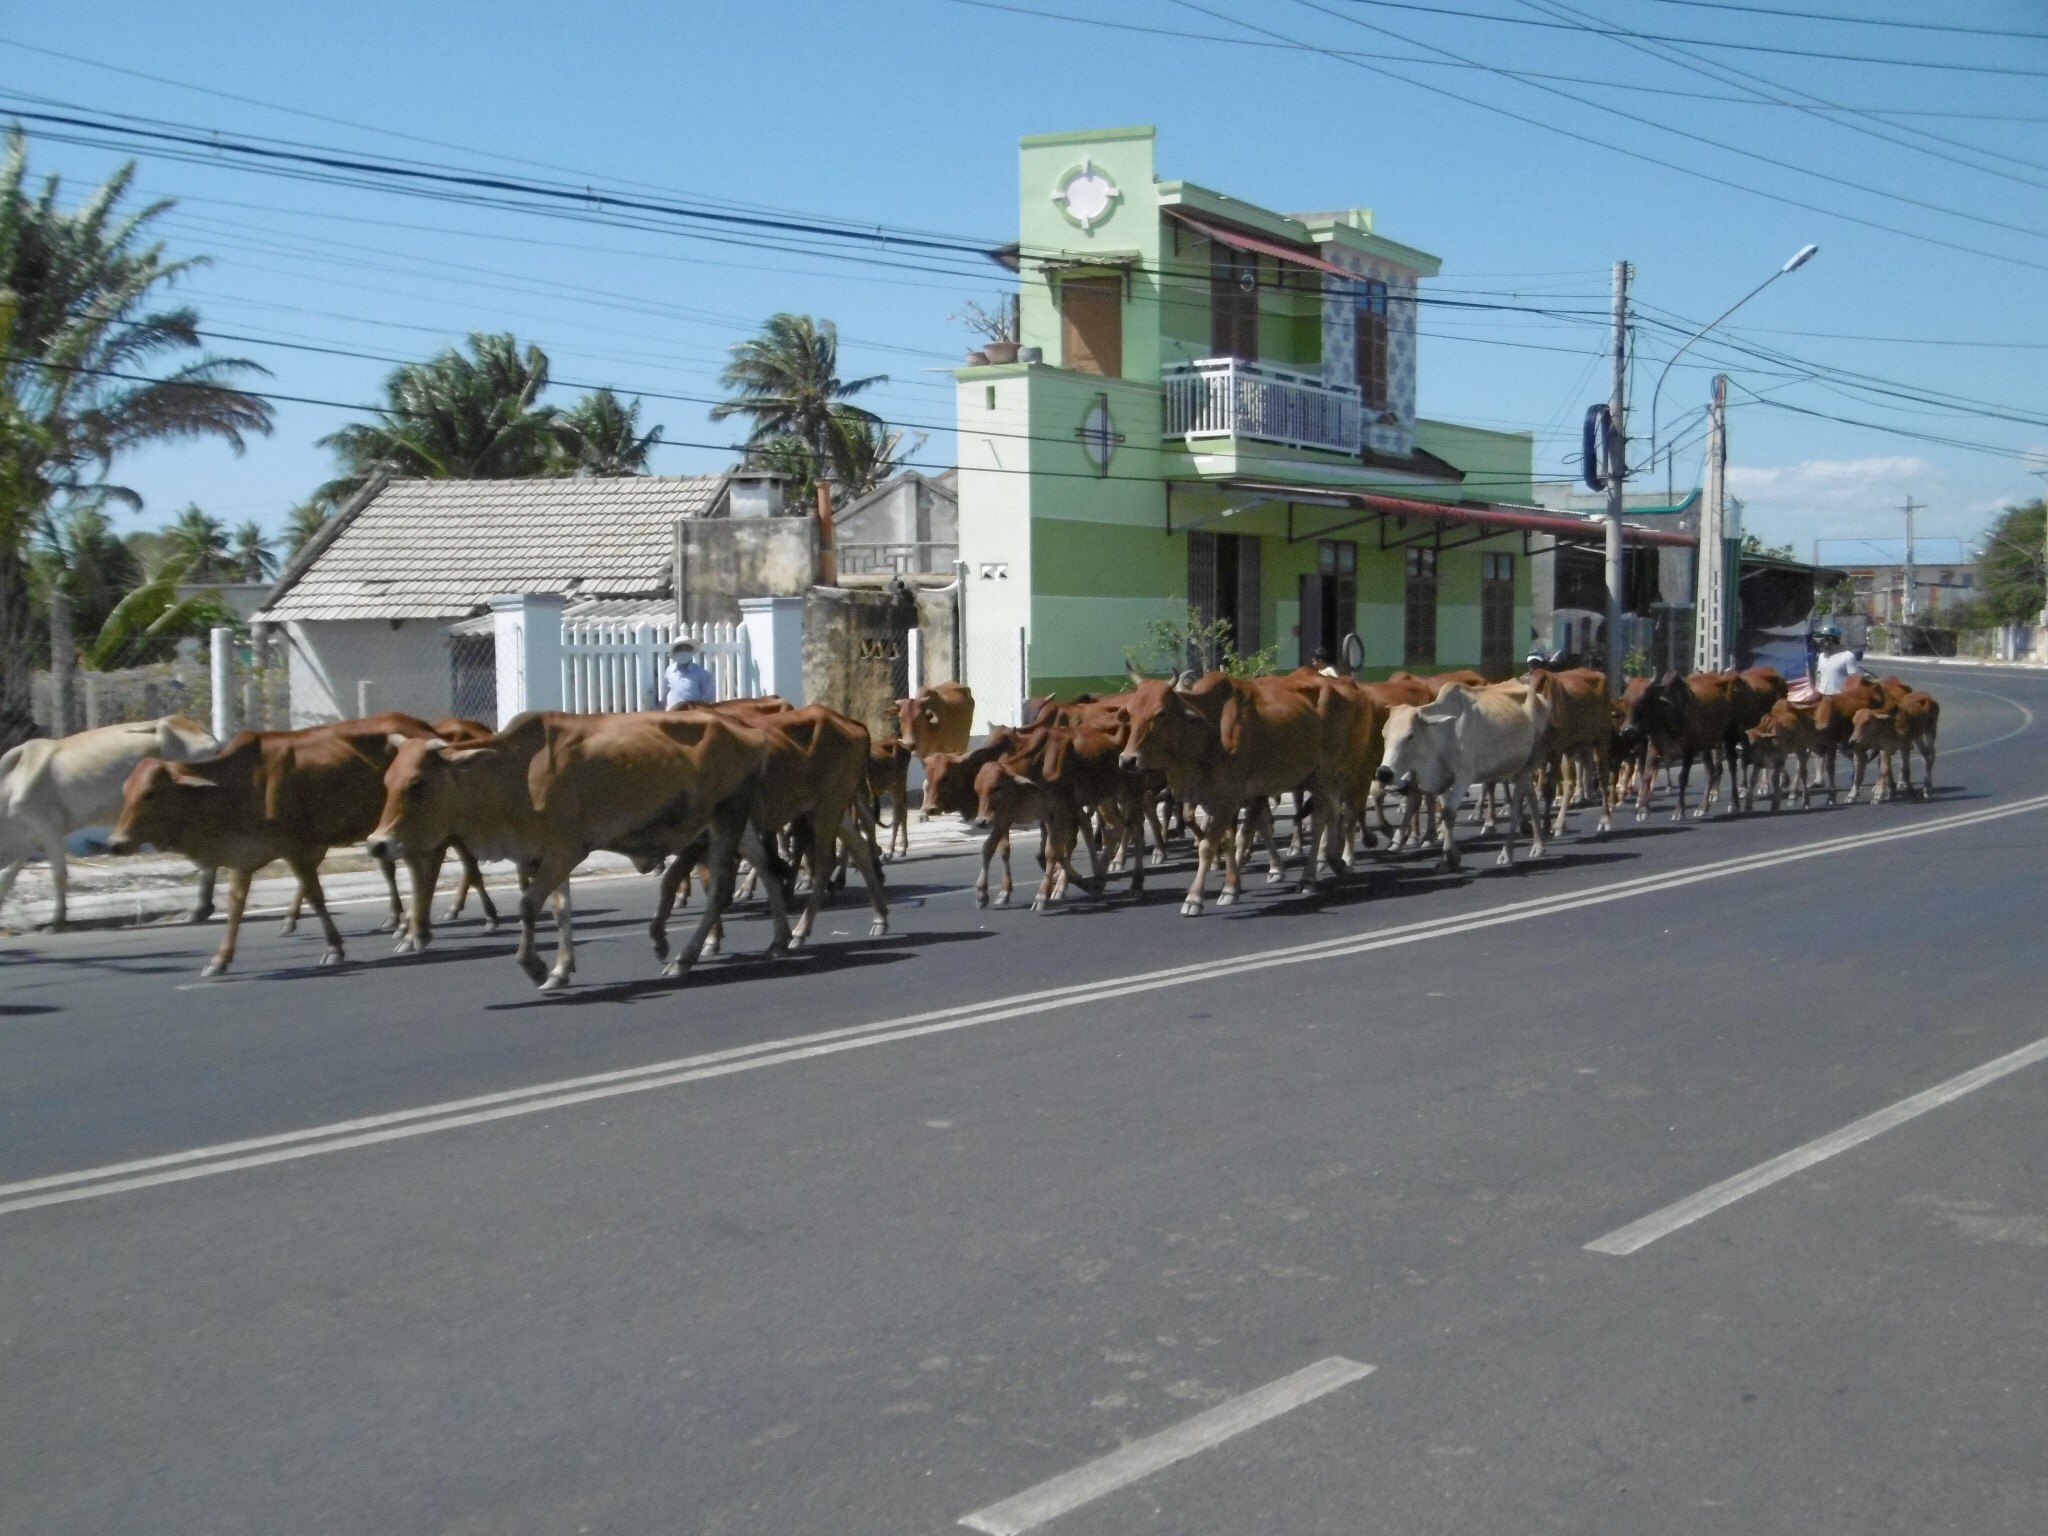 Cows on the road in Vietnam